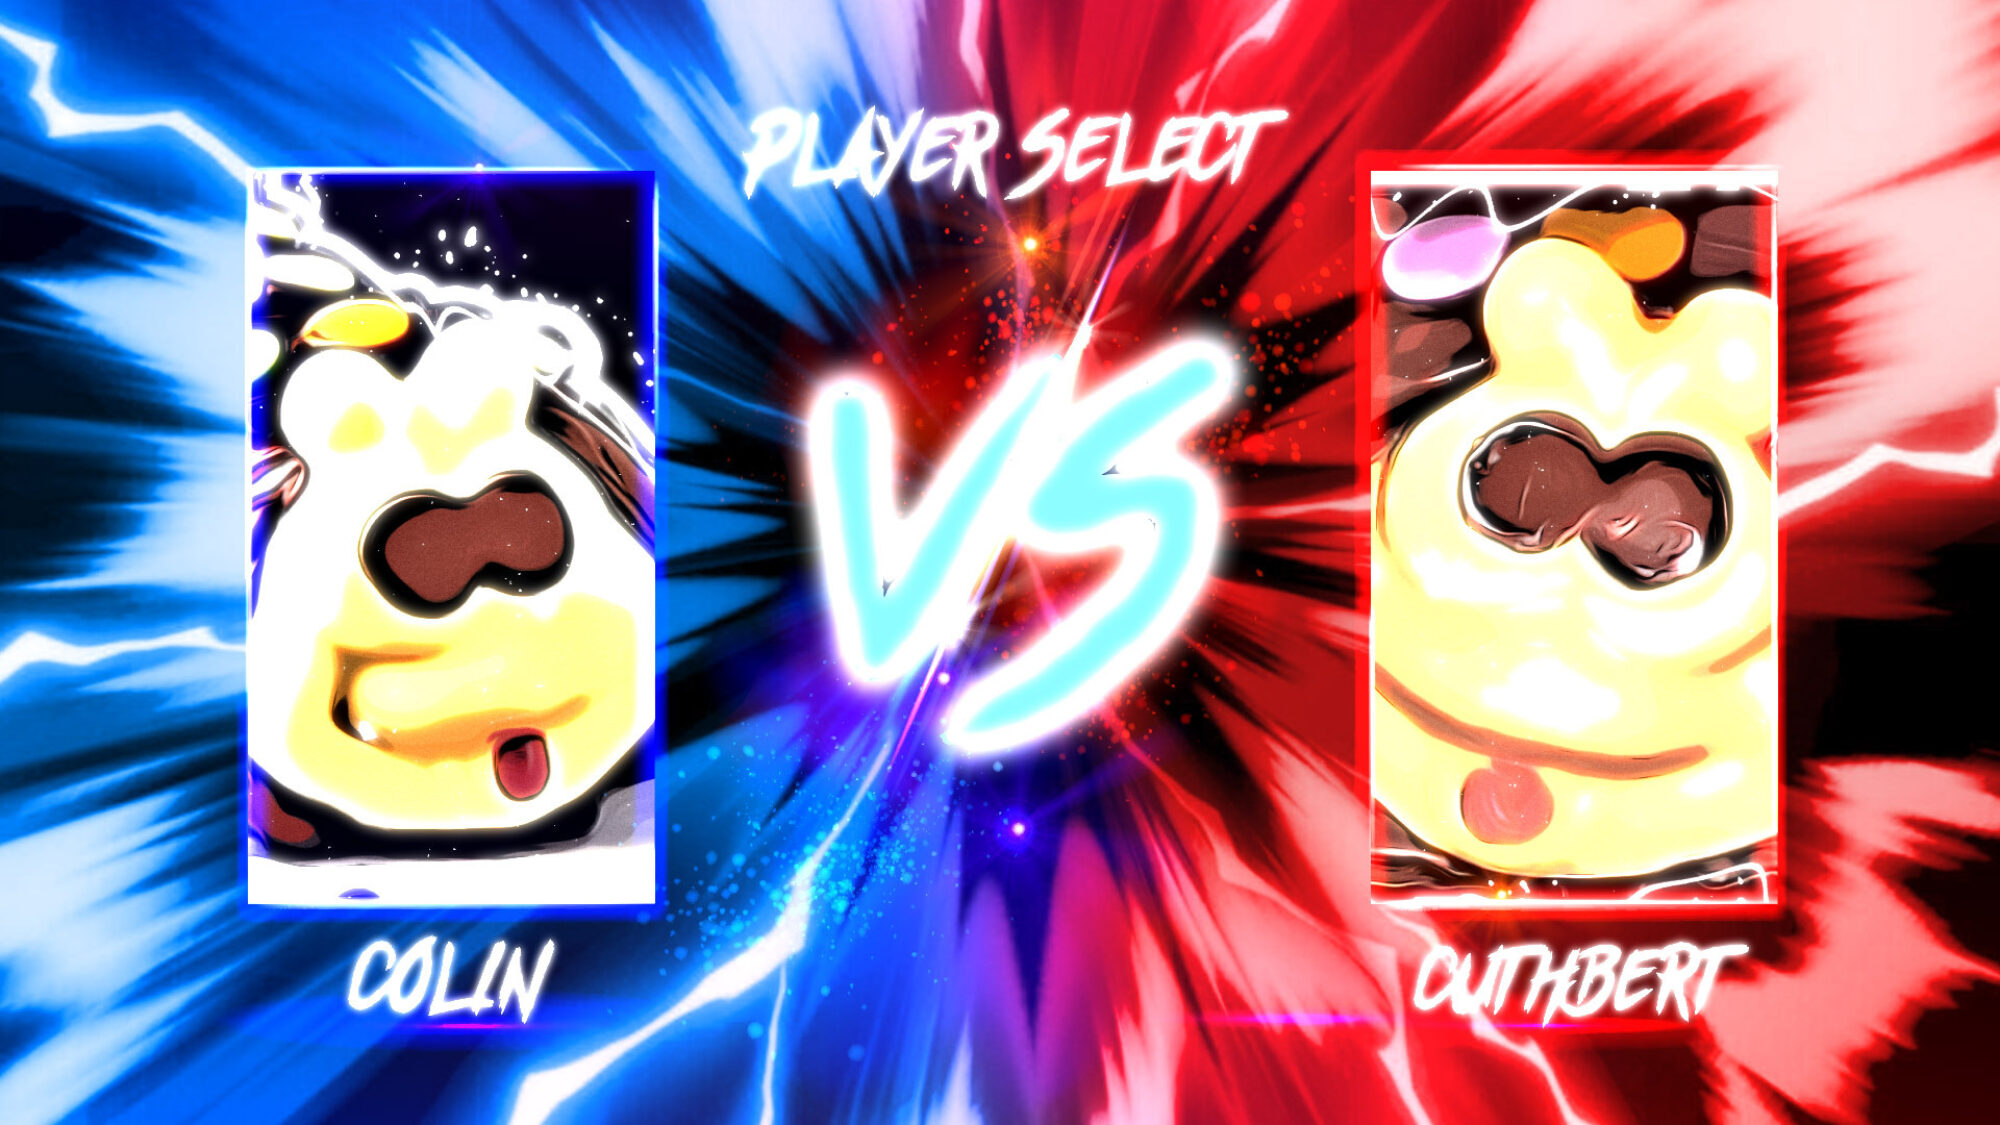 Video game depiction of M&S Colin vs Aldi's Cuthbert the caterpillar